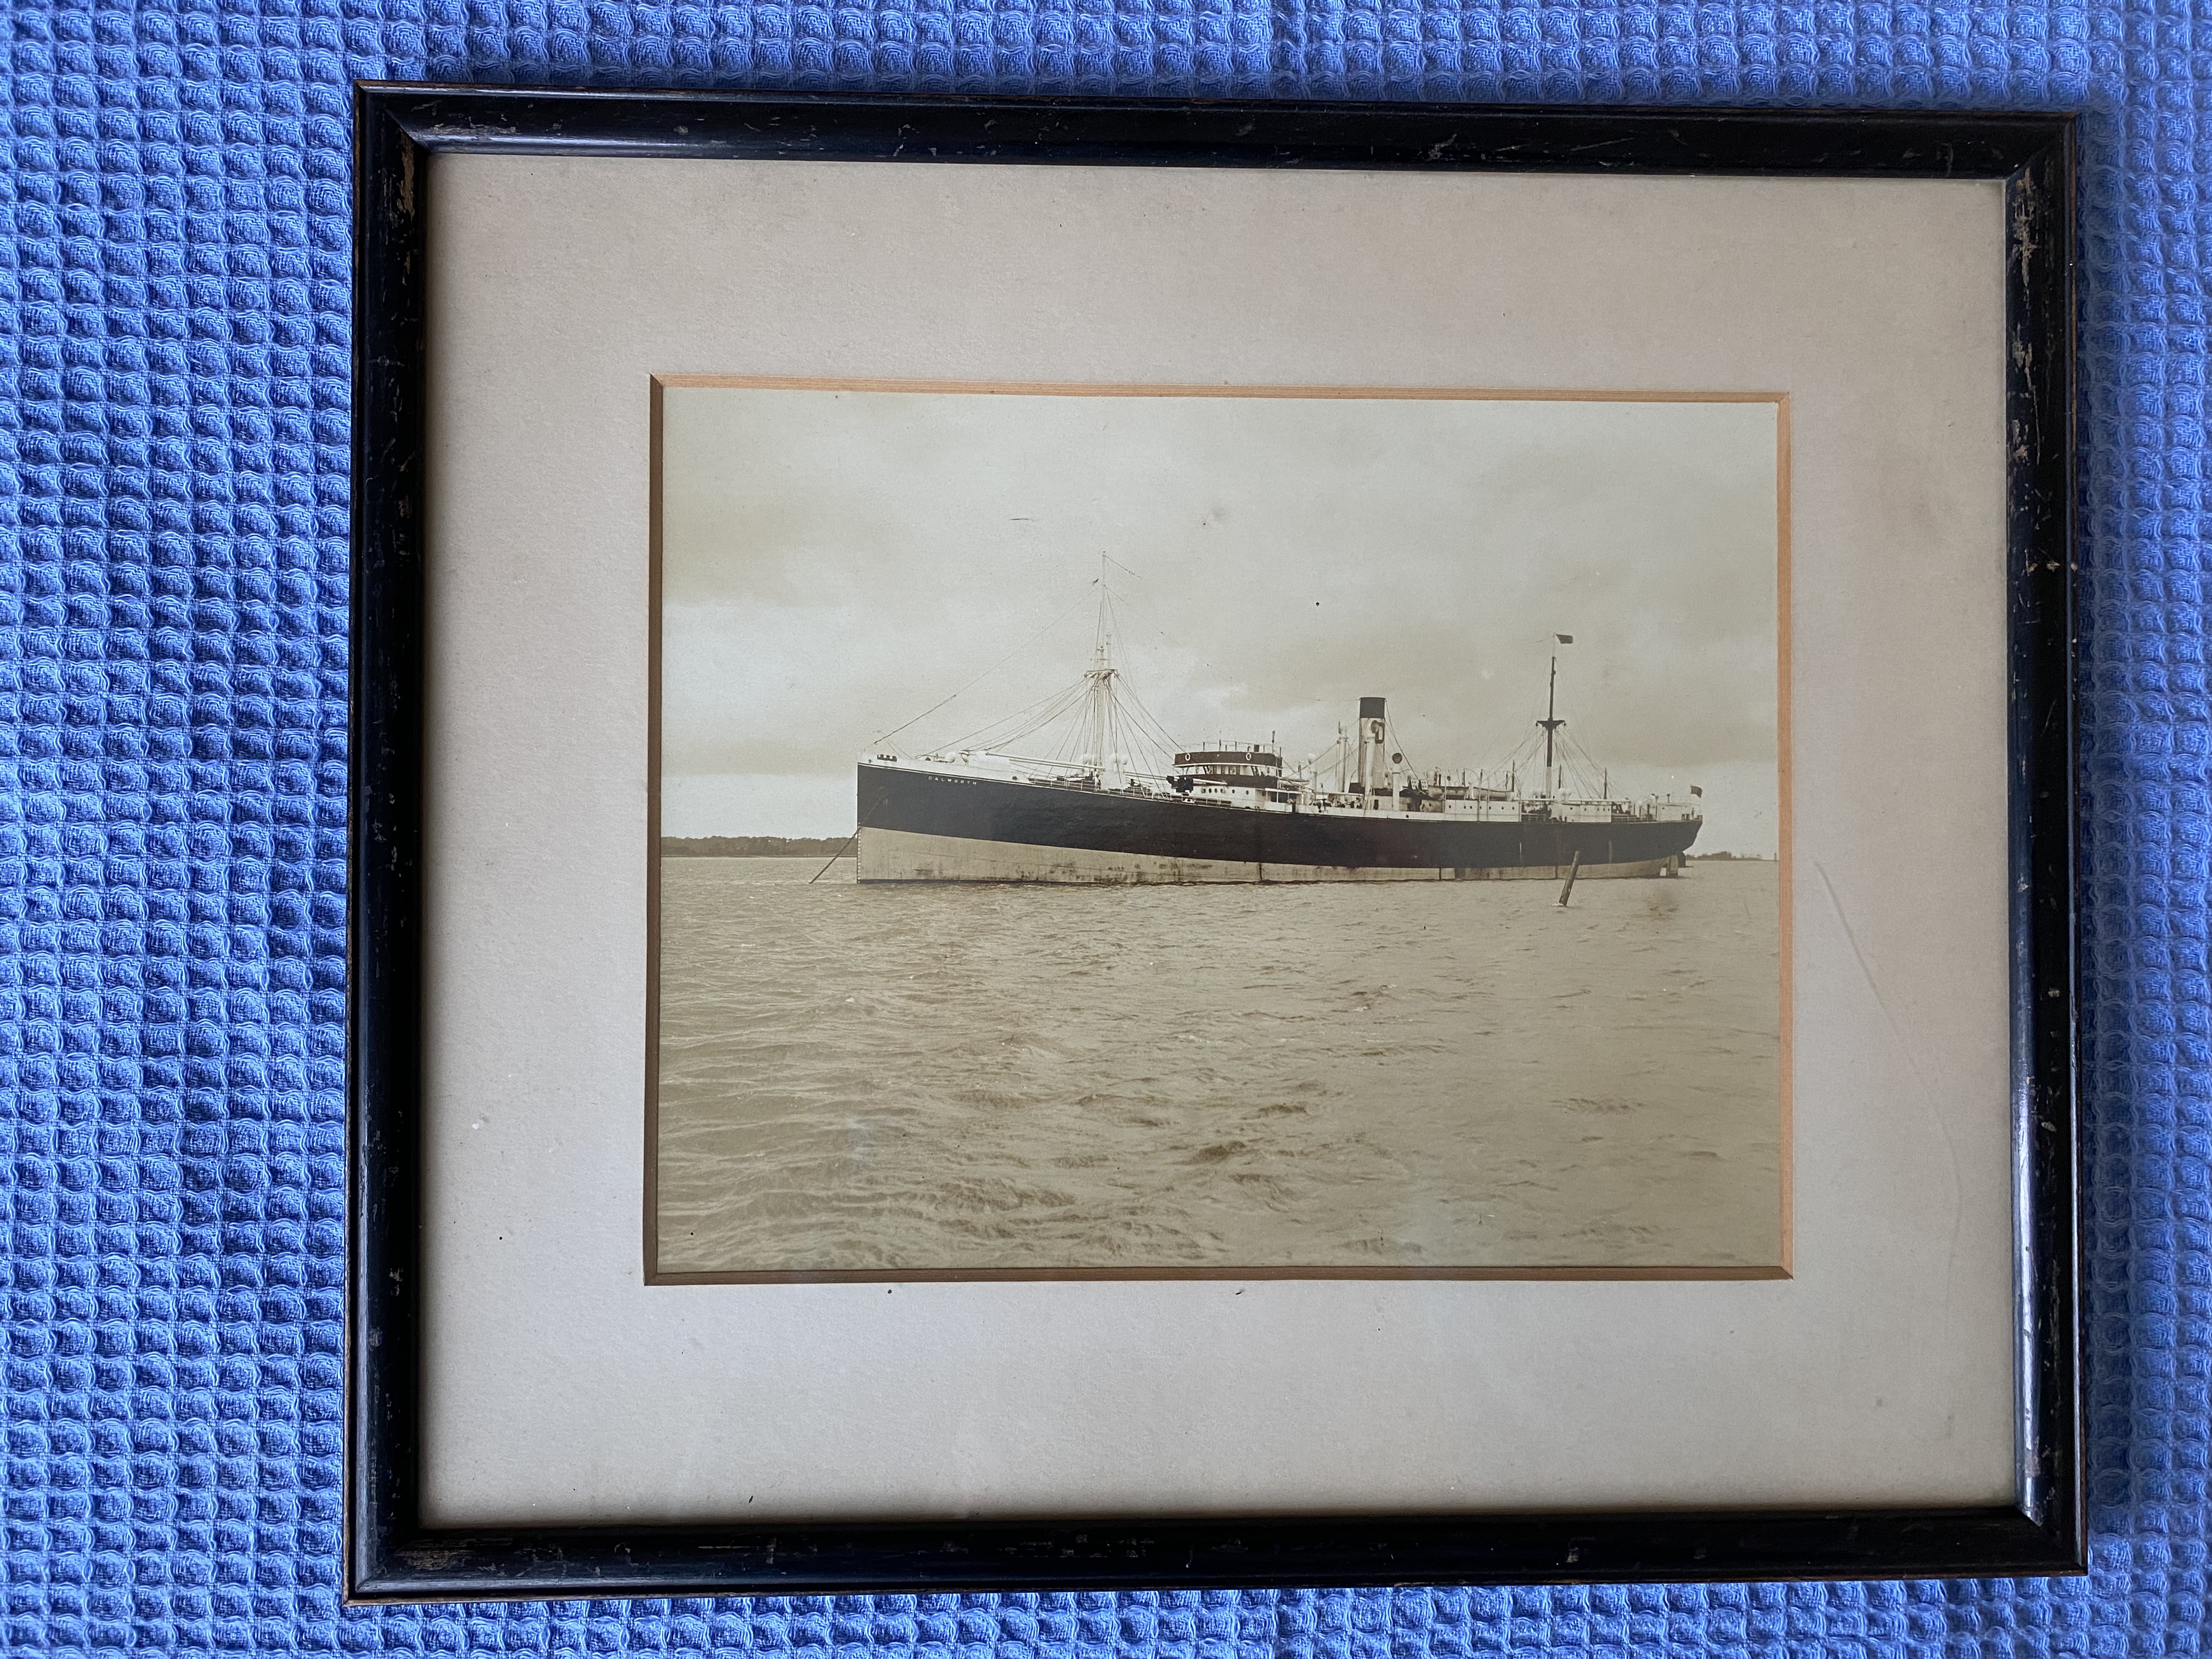  FROM THE DALGLEISH STEAMSHIP COMPANY A FRAMED B/W PHOTO OF THE DALWORTH